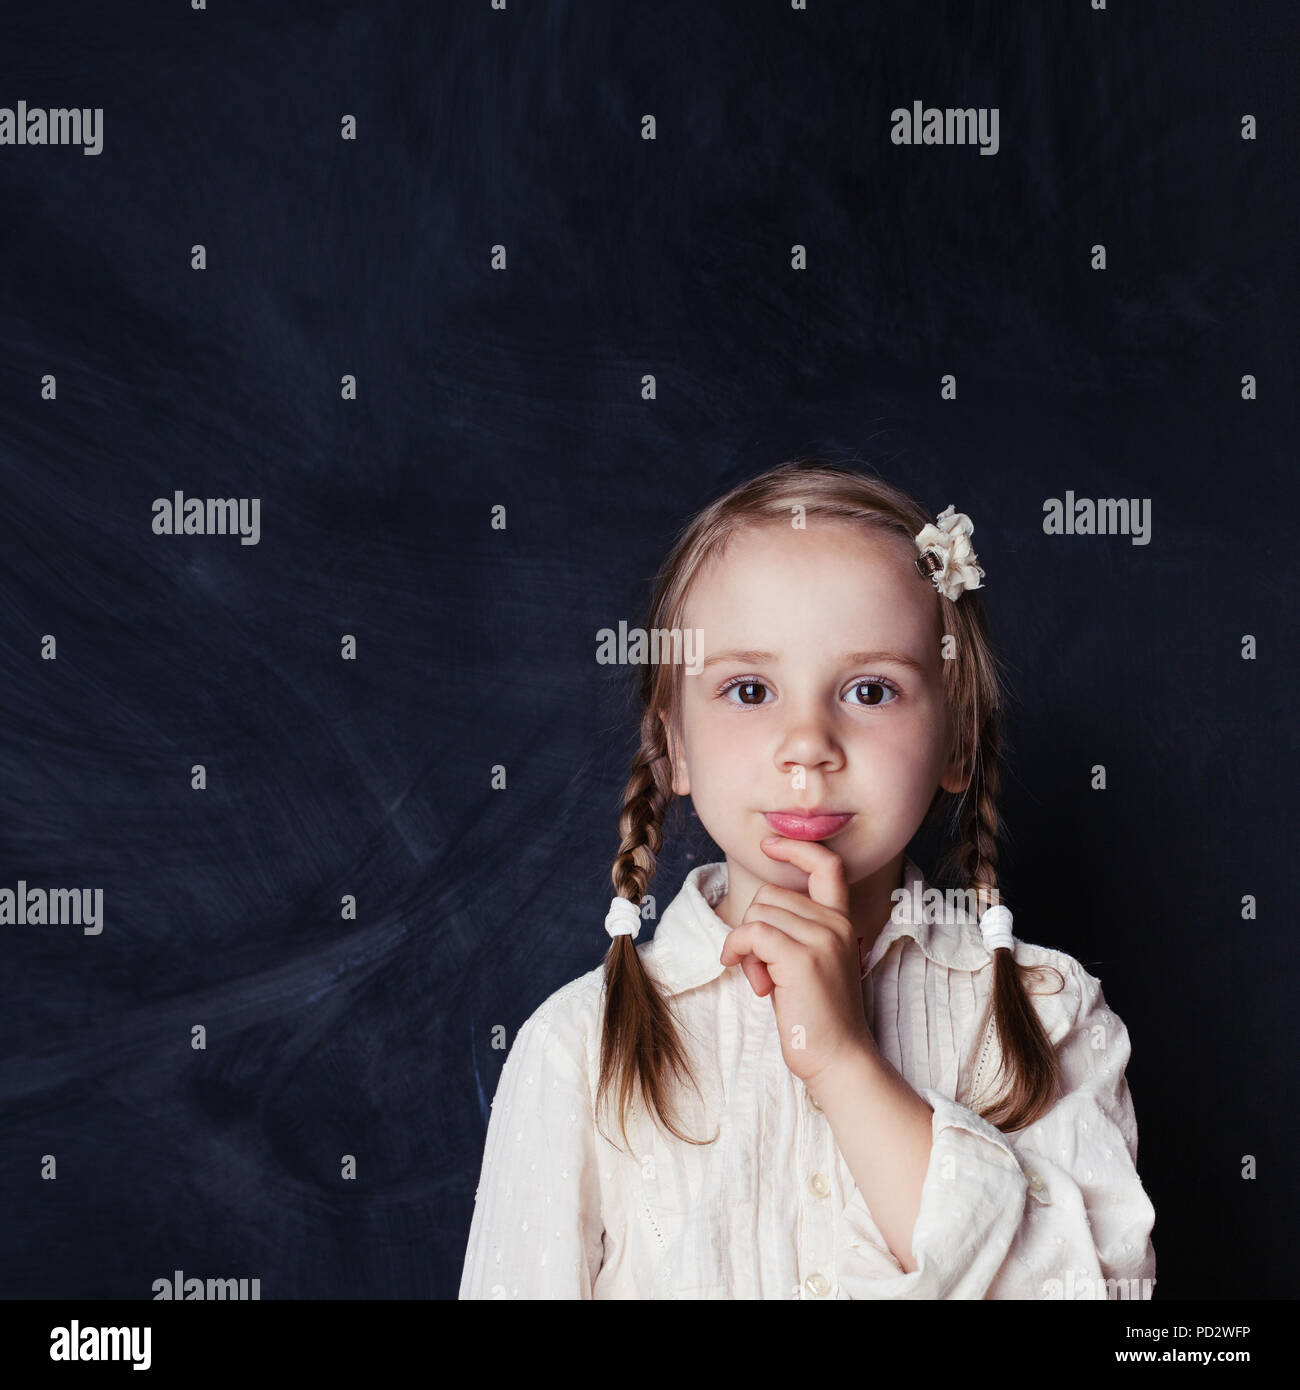 Сurious child thinking. Little girl on chalk board background with copy space. Back to school, kid creativity and brainstorming concept Stock Photo